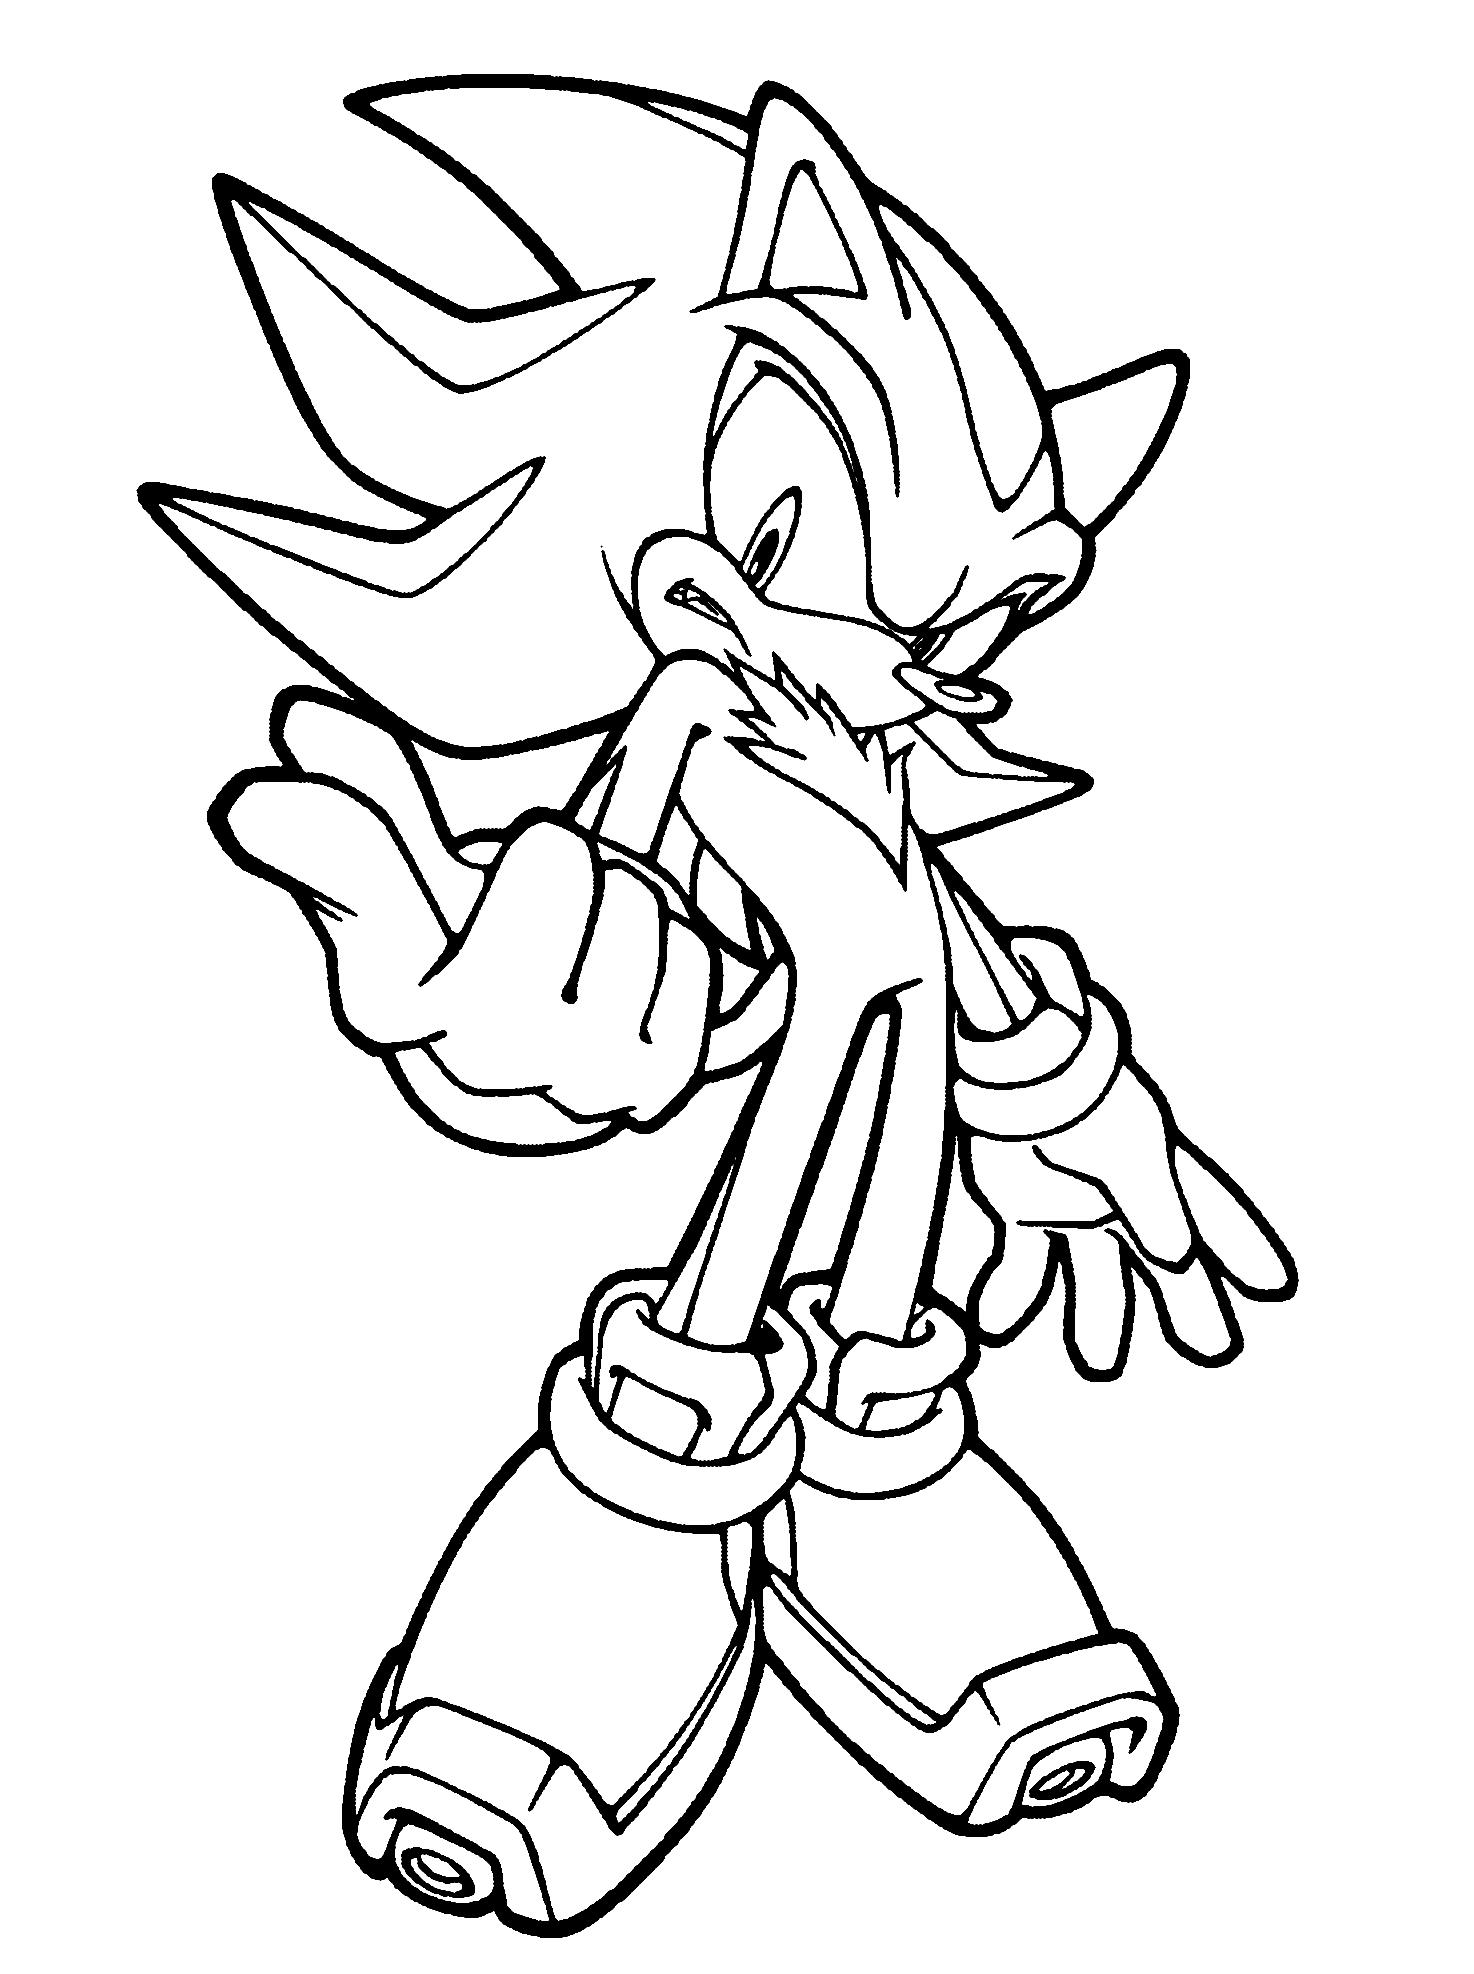 Shadow The Hedgehog Coloring Page